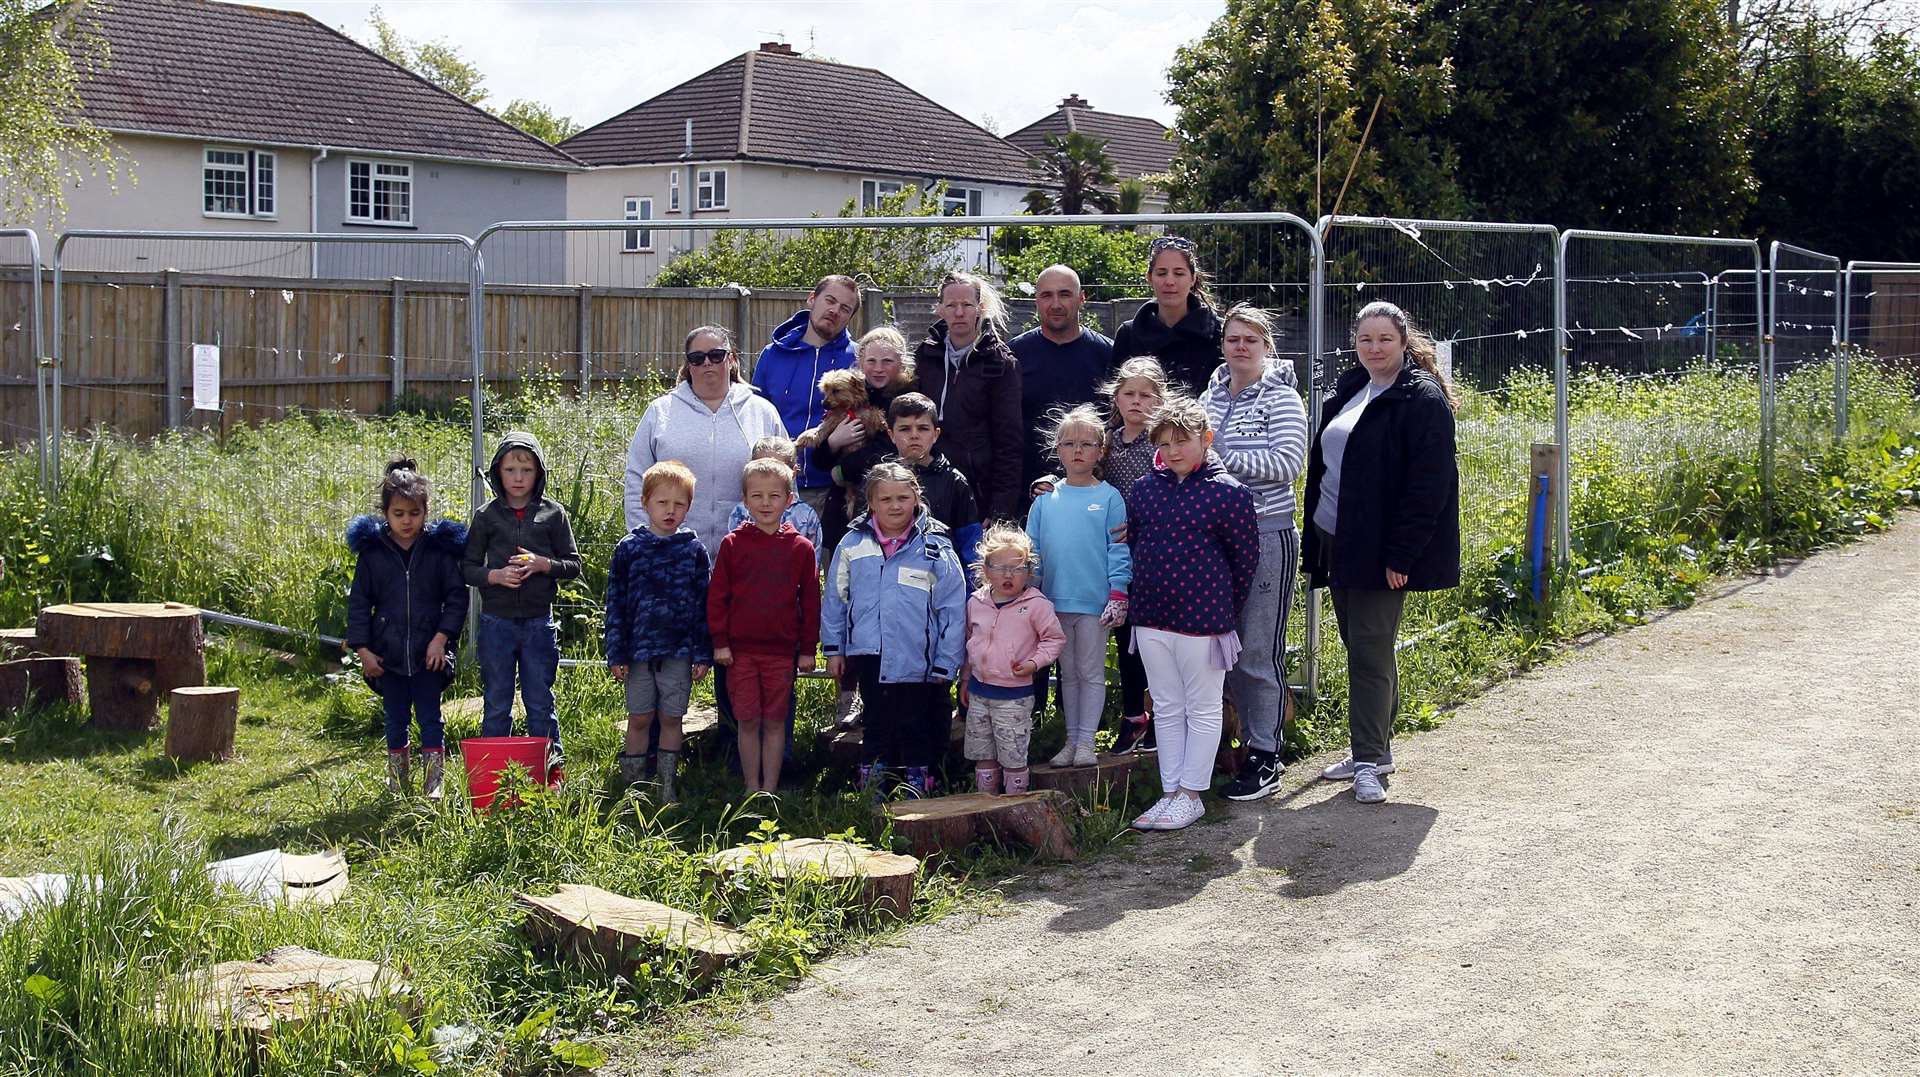 Shepway Chariots Allotment Gardens, Maidstone, supporters pictured in front of the contaminated land with Nikki Gough (centre)